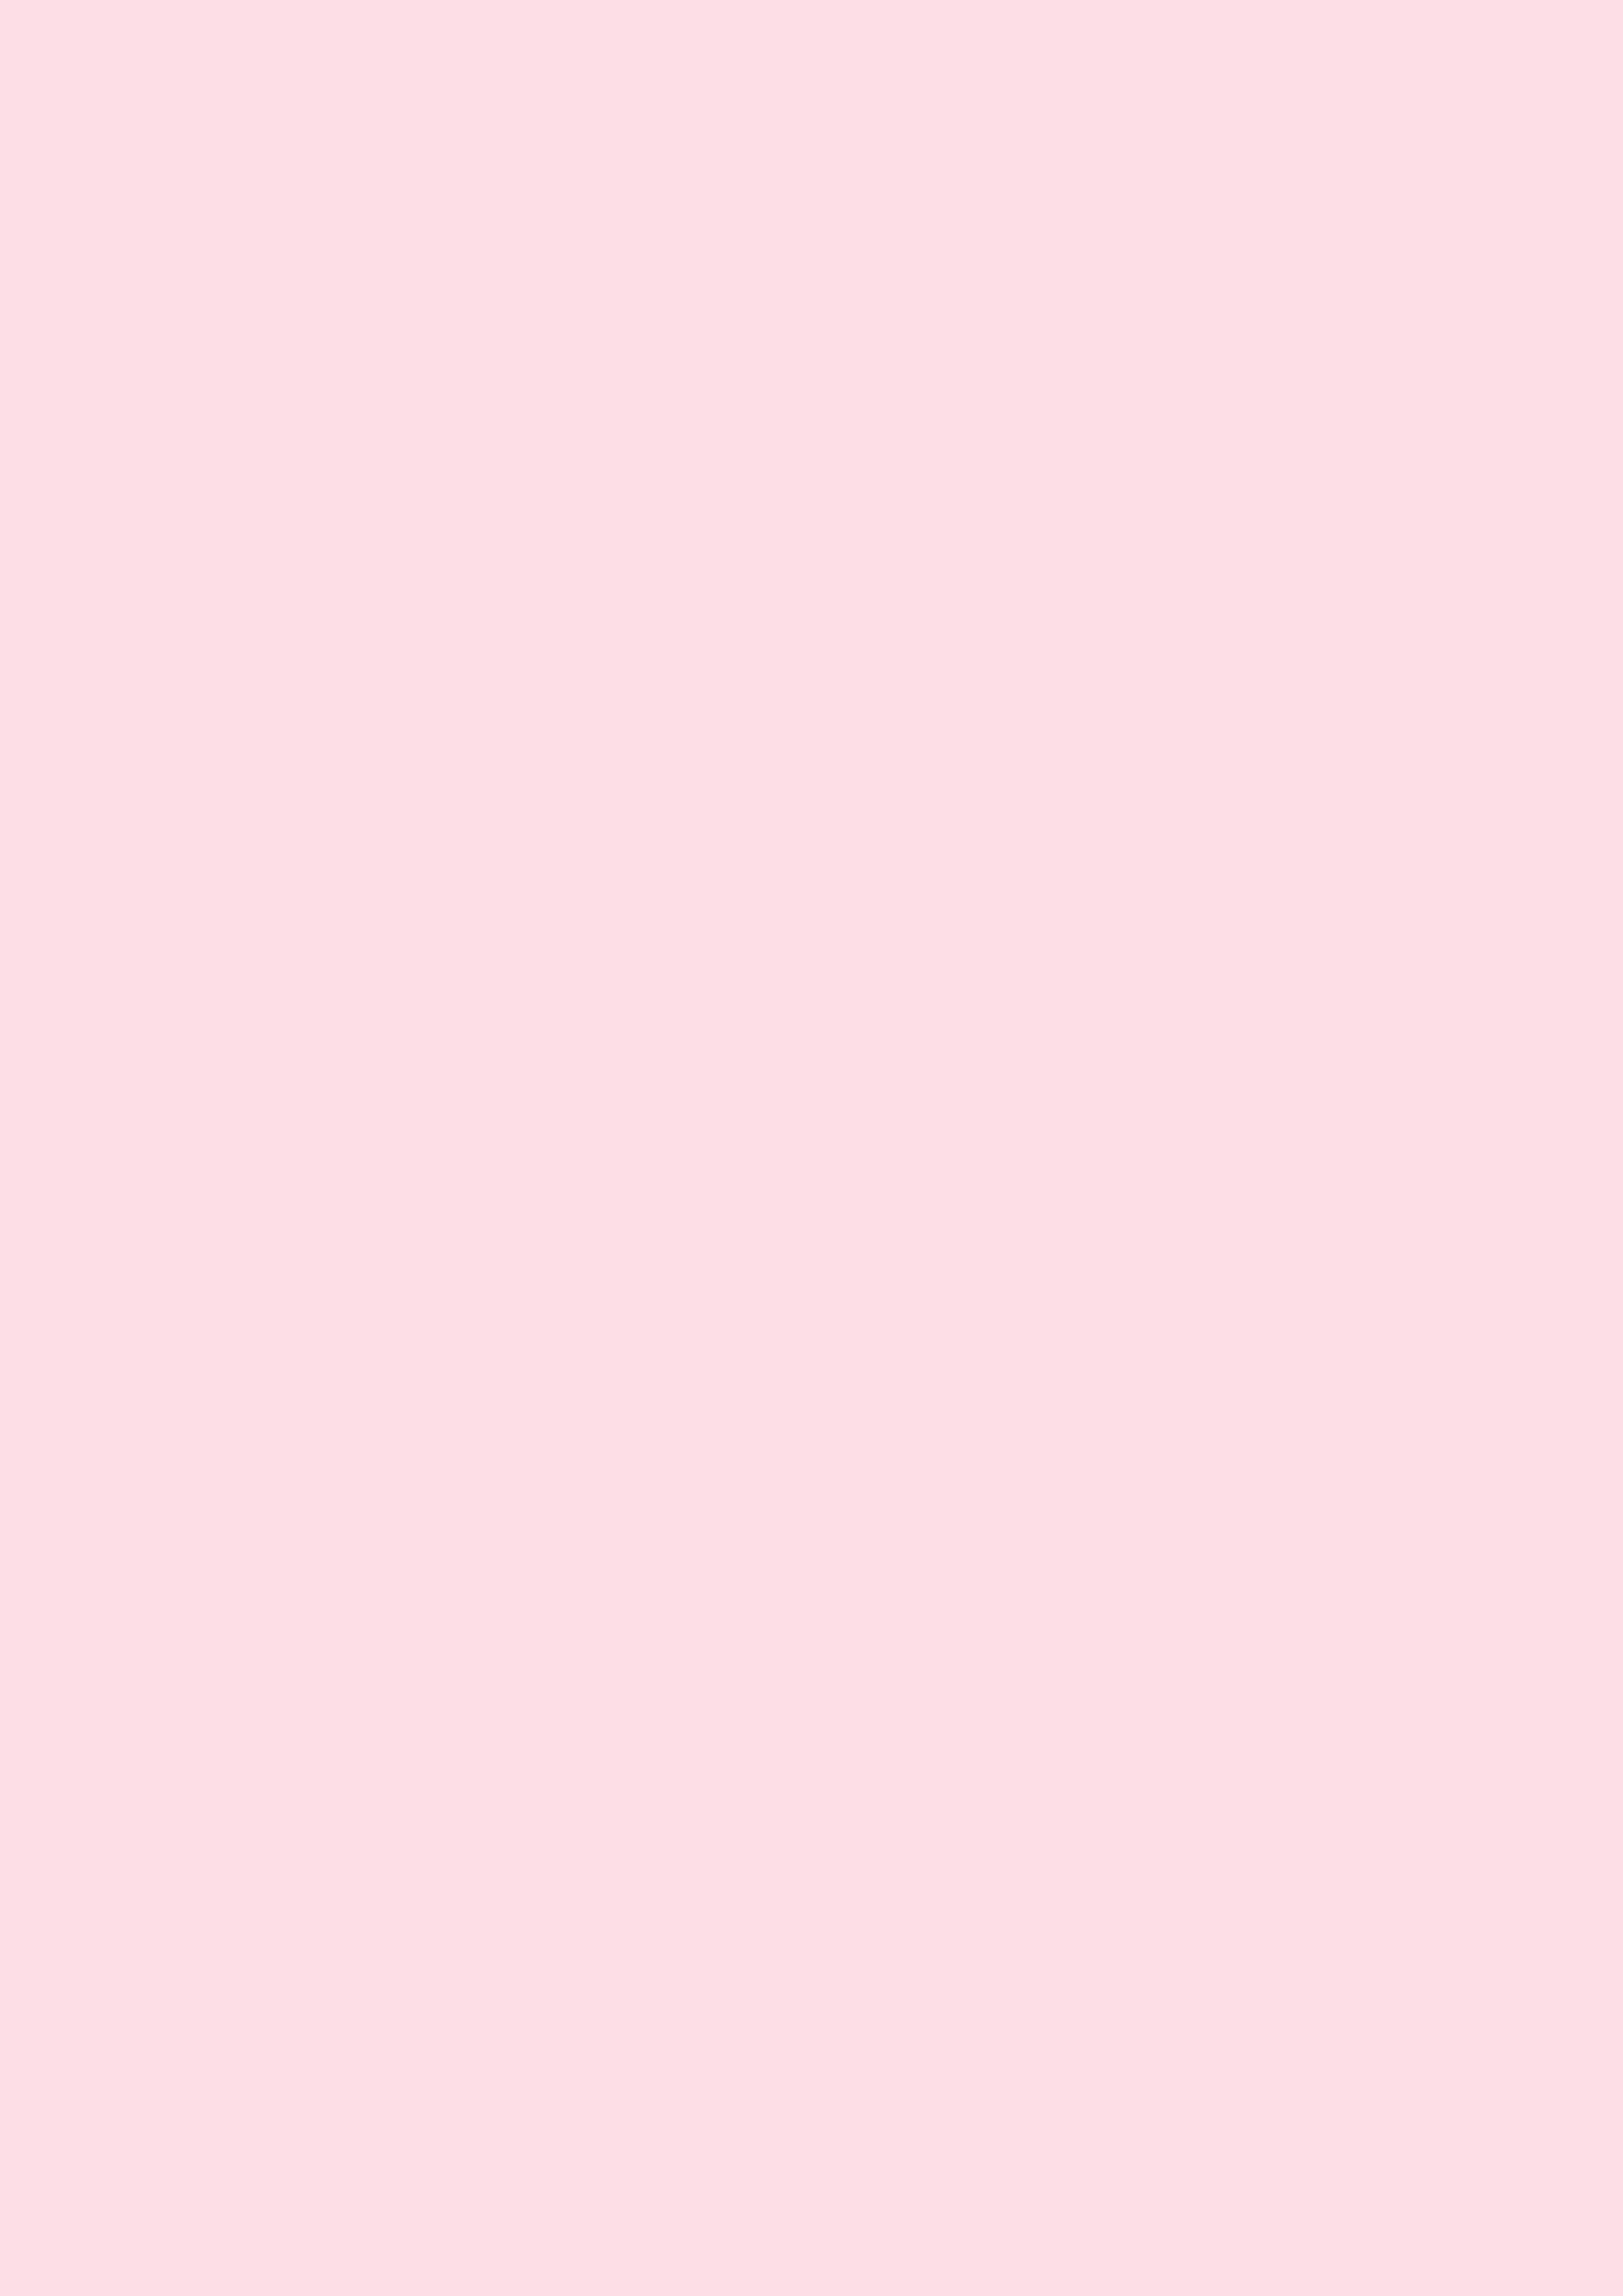 2480x3508 Piggy Pink Solid Color Background